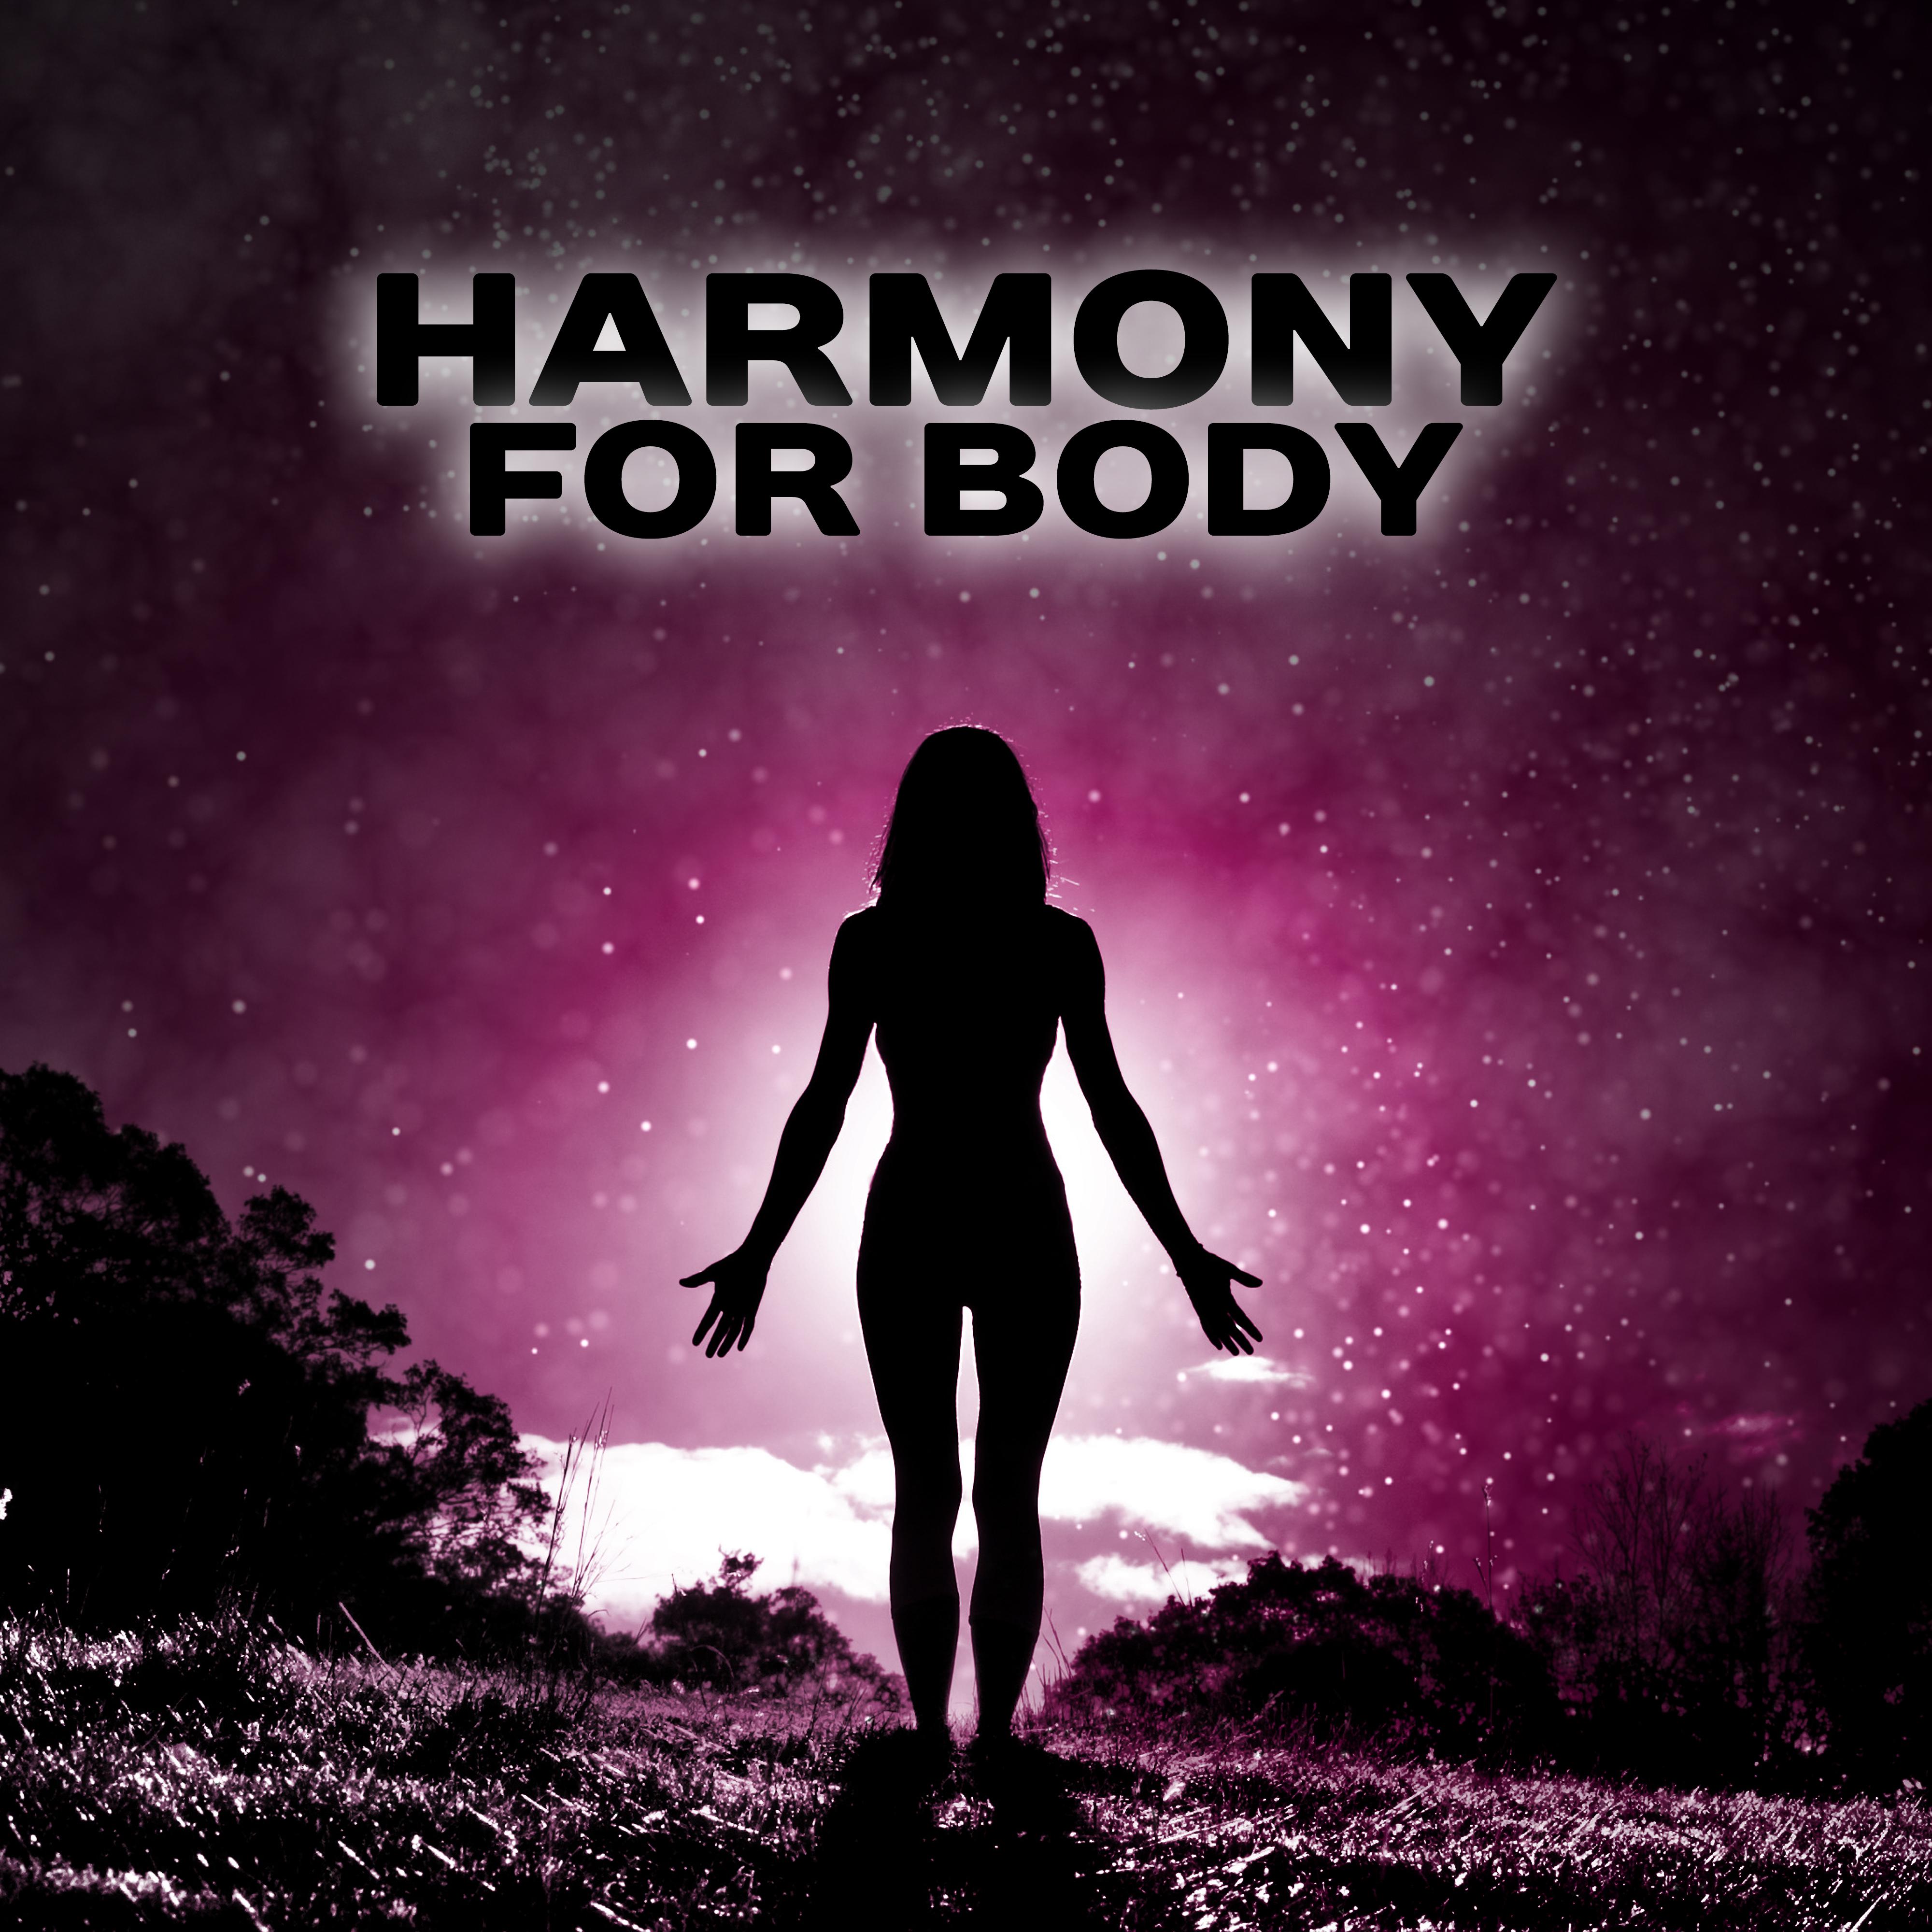 Harmony for Body  Spa Music, Soft Sounds for Wellness, Massage, Zen Music, Stress Relief, Pure Mind, Healing Body, Soothing Nature Sounds